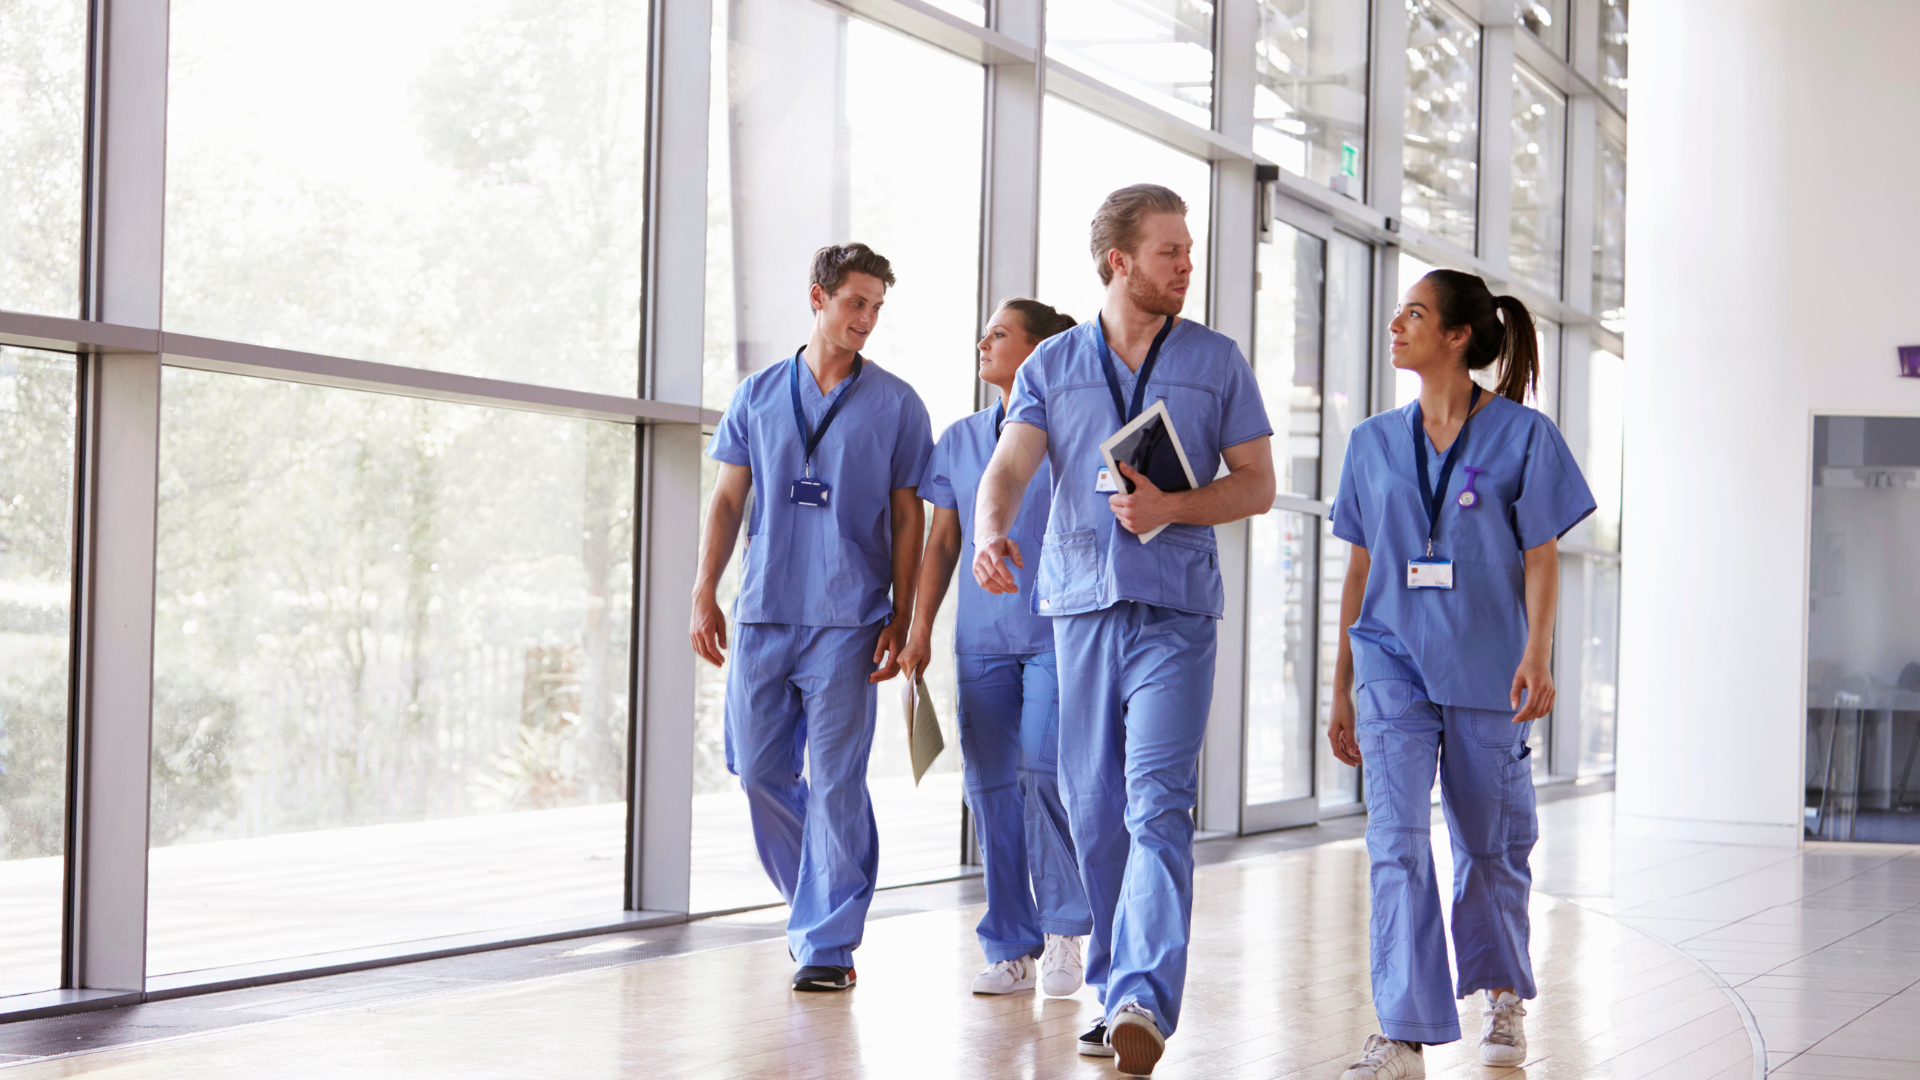 A picture of healthcare professions standing together